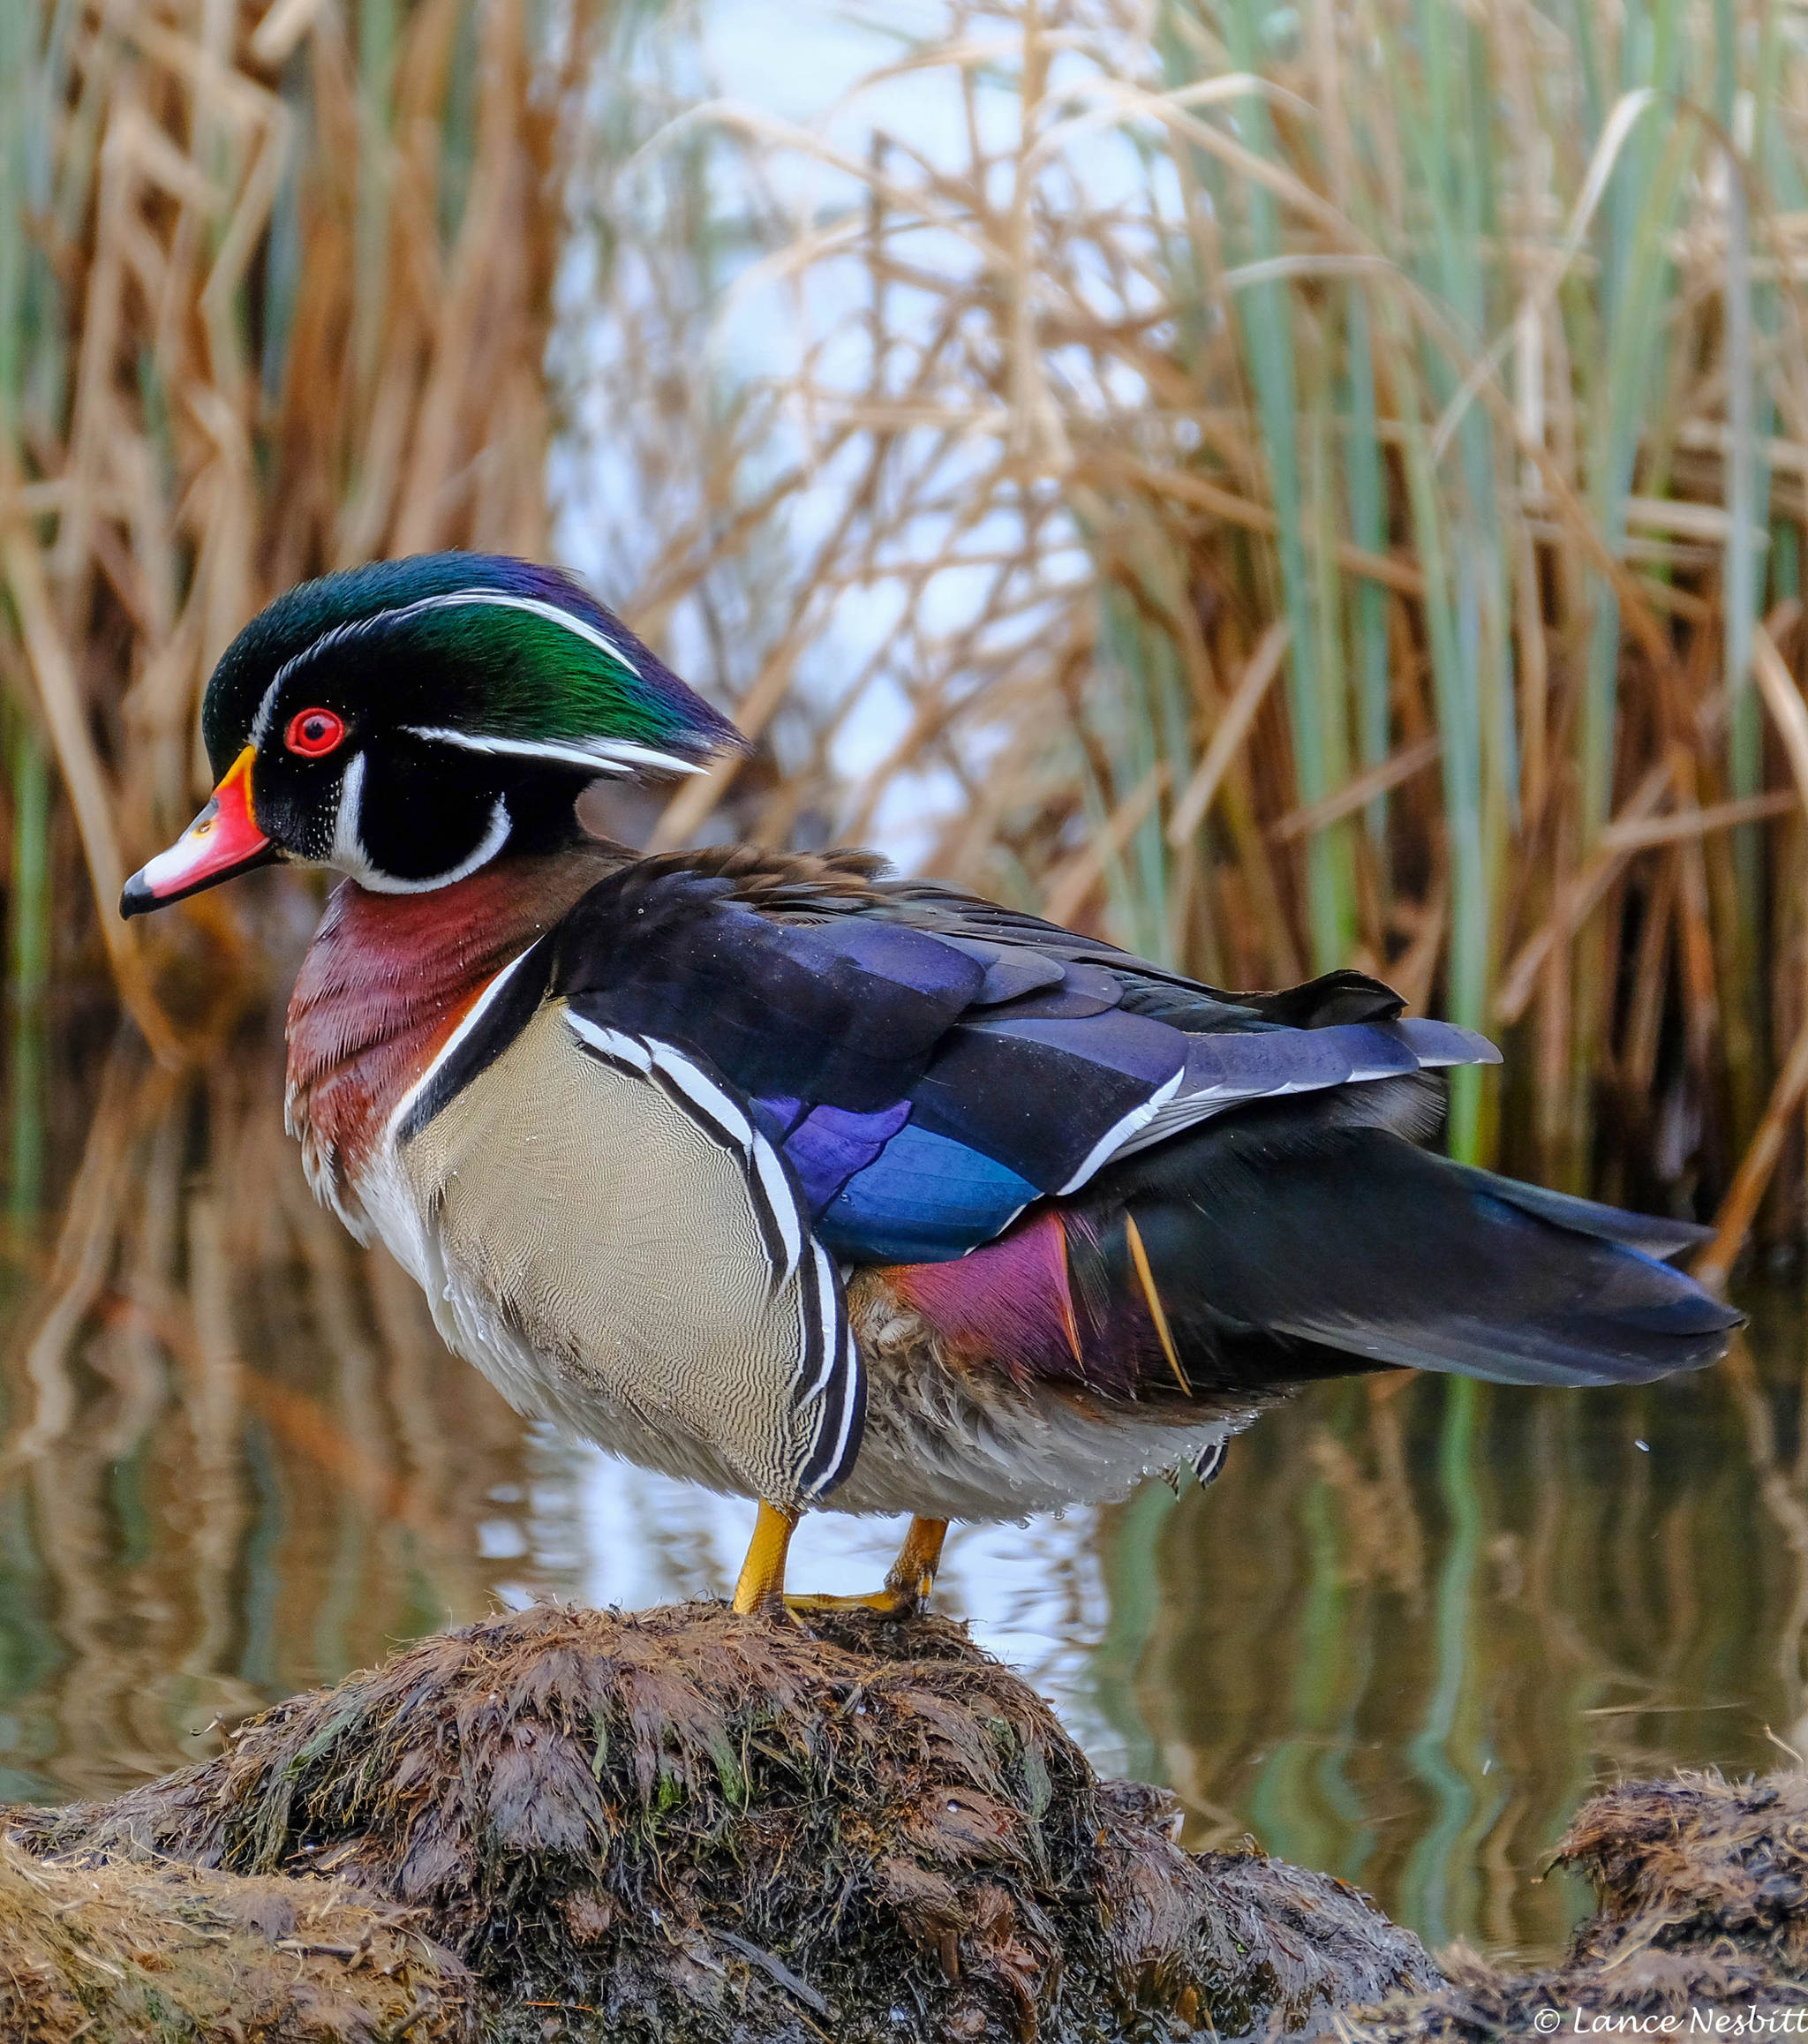 A wood duck shows his plumage. (Photo by Lance Nesbitt)